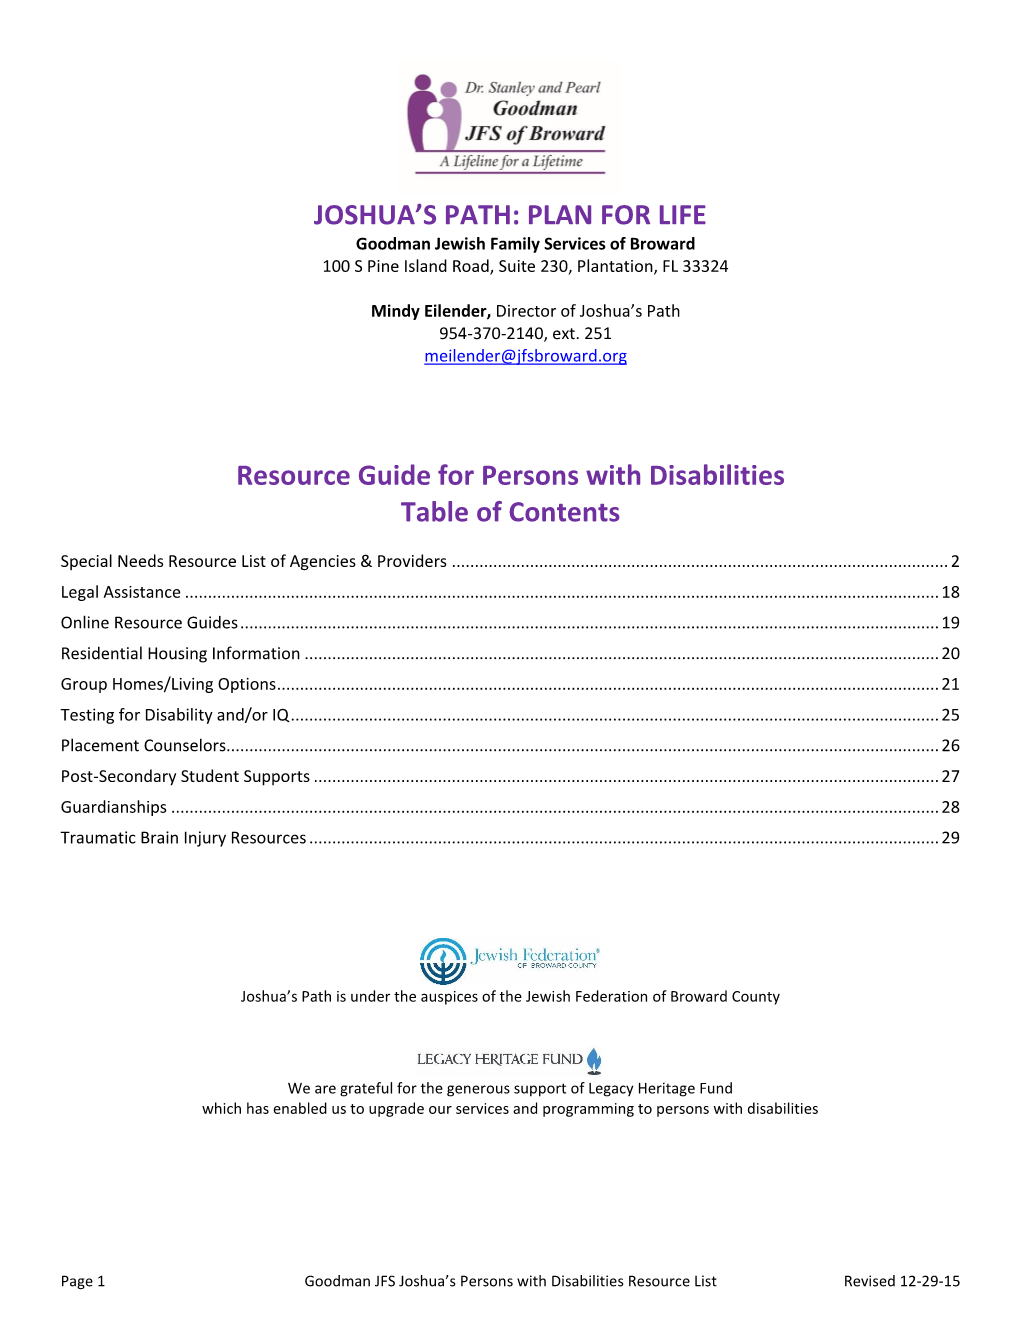 PLAN for LIFE Resource Guide for Persons with Disabilities Table Of